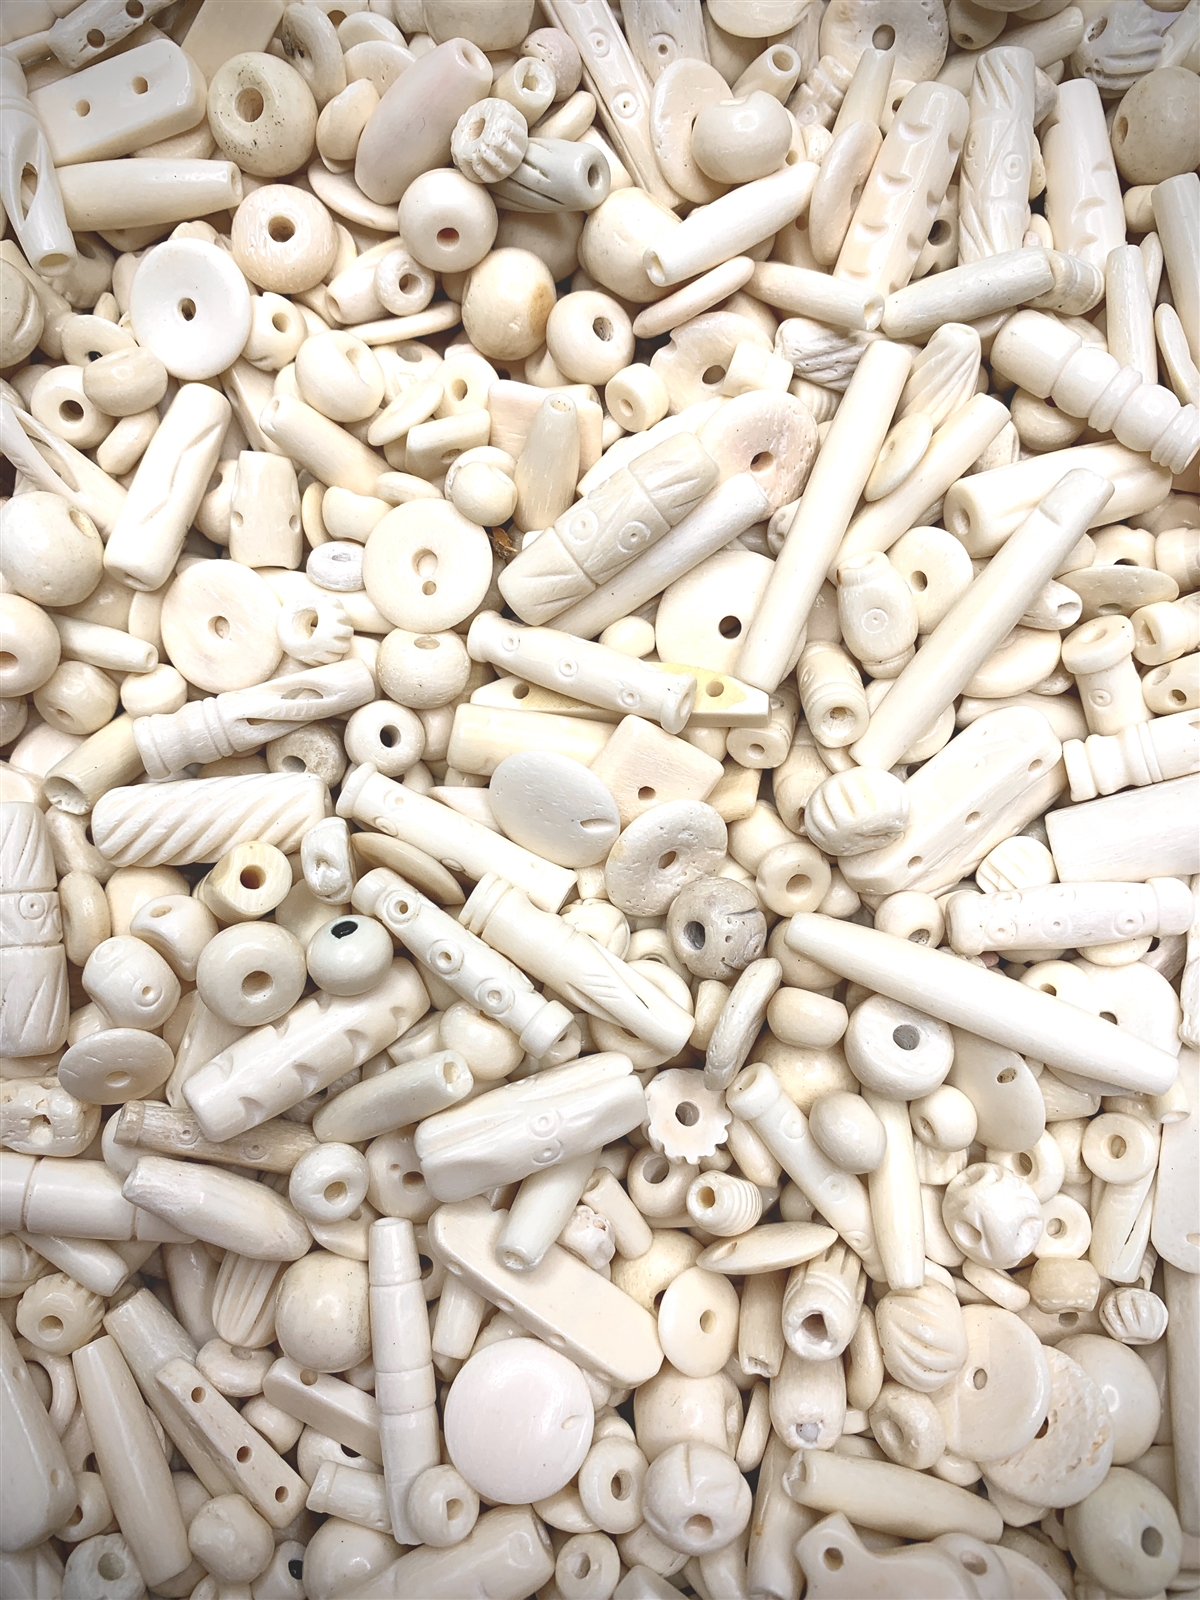 RARE High Quality White Buffalo 4mm Rondell Beads (Package